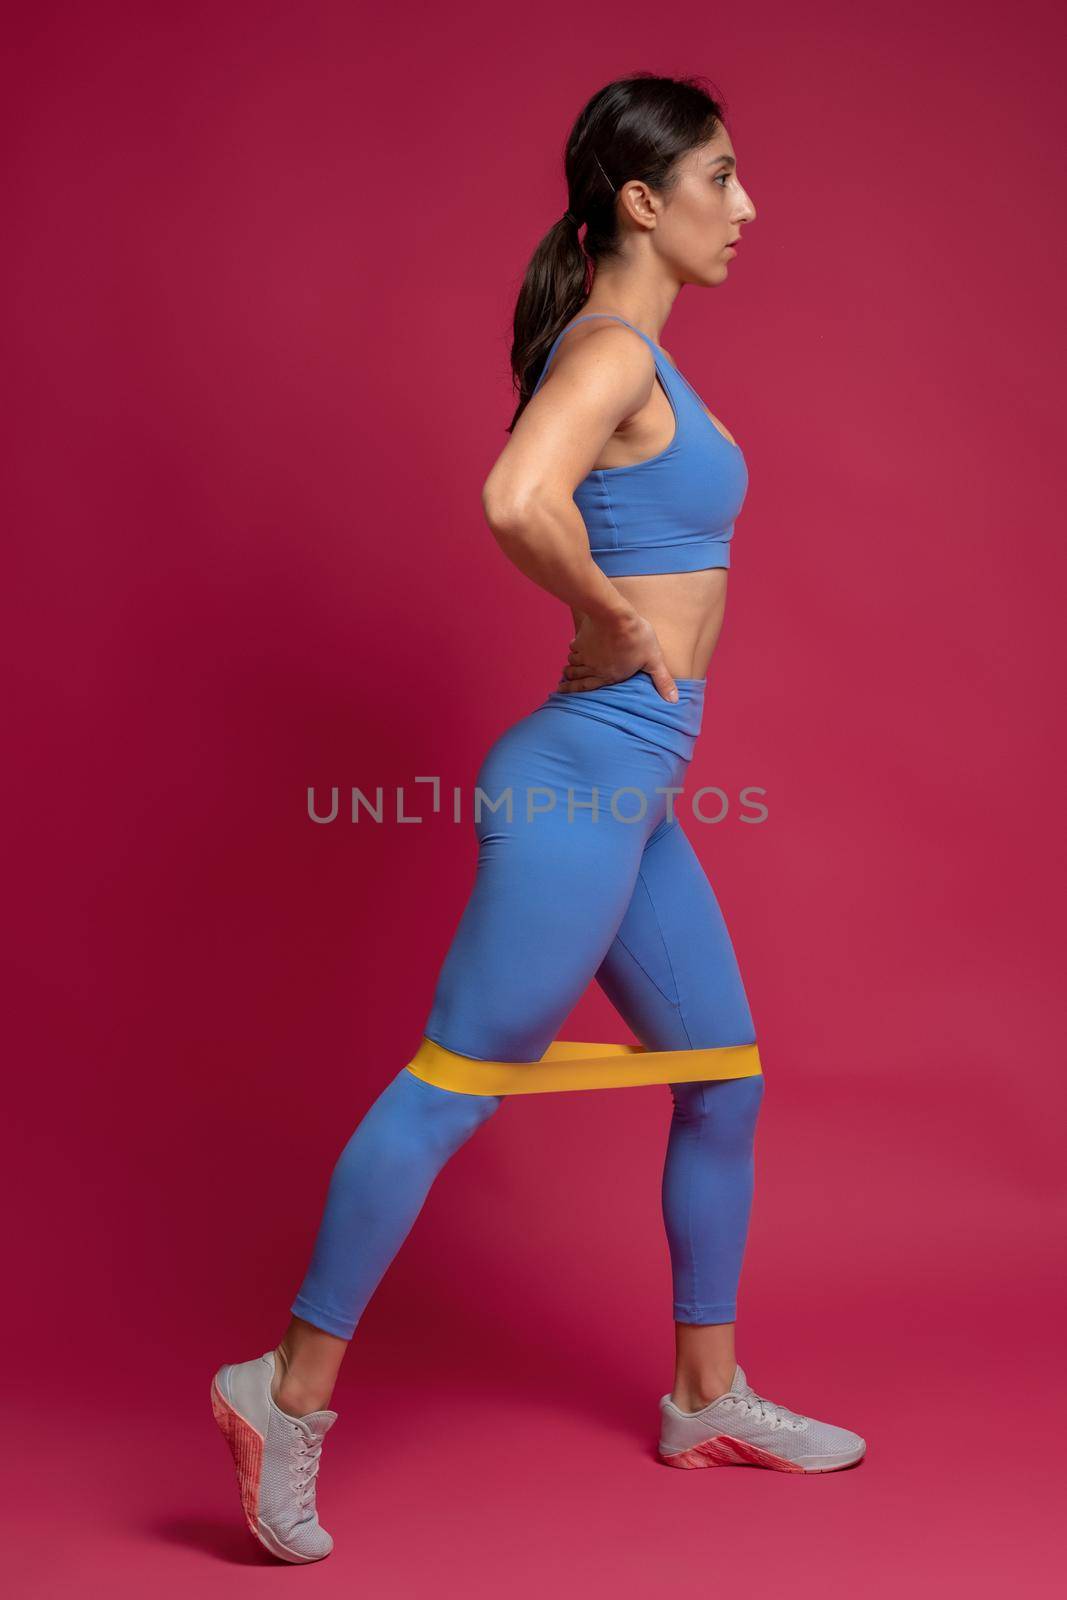 Athletic young woman performing leg and glutes training with loop resistance band in studio on maroon background. Active lifestyle and fitness concept